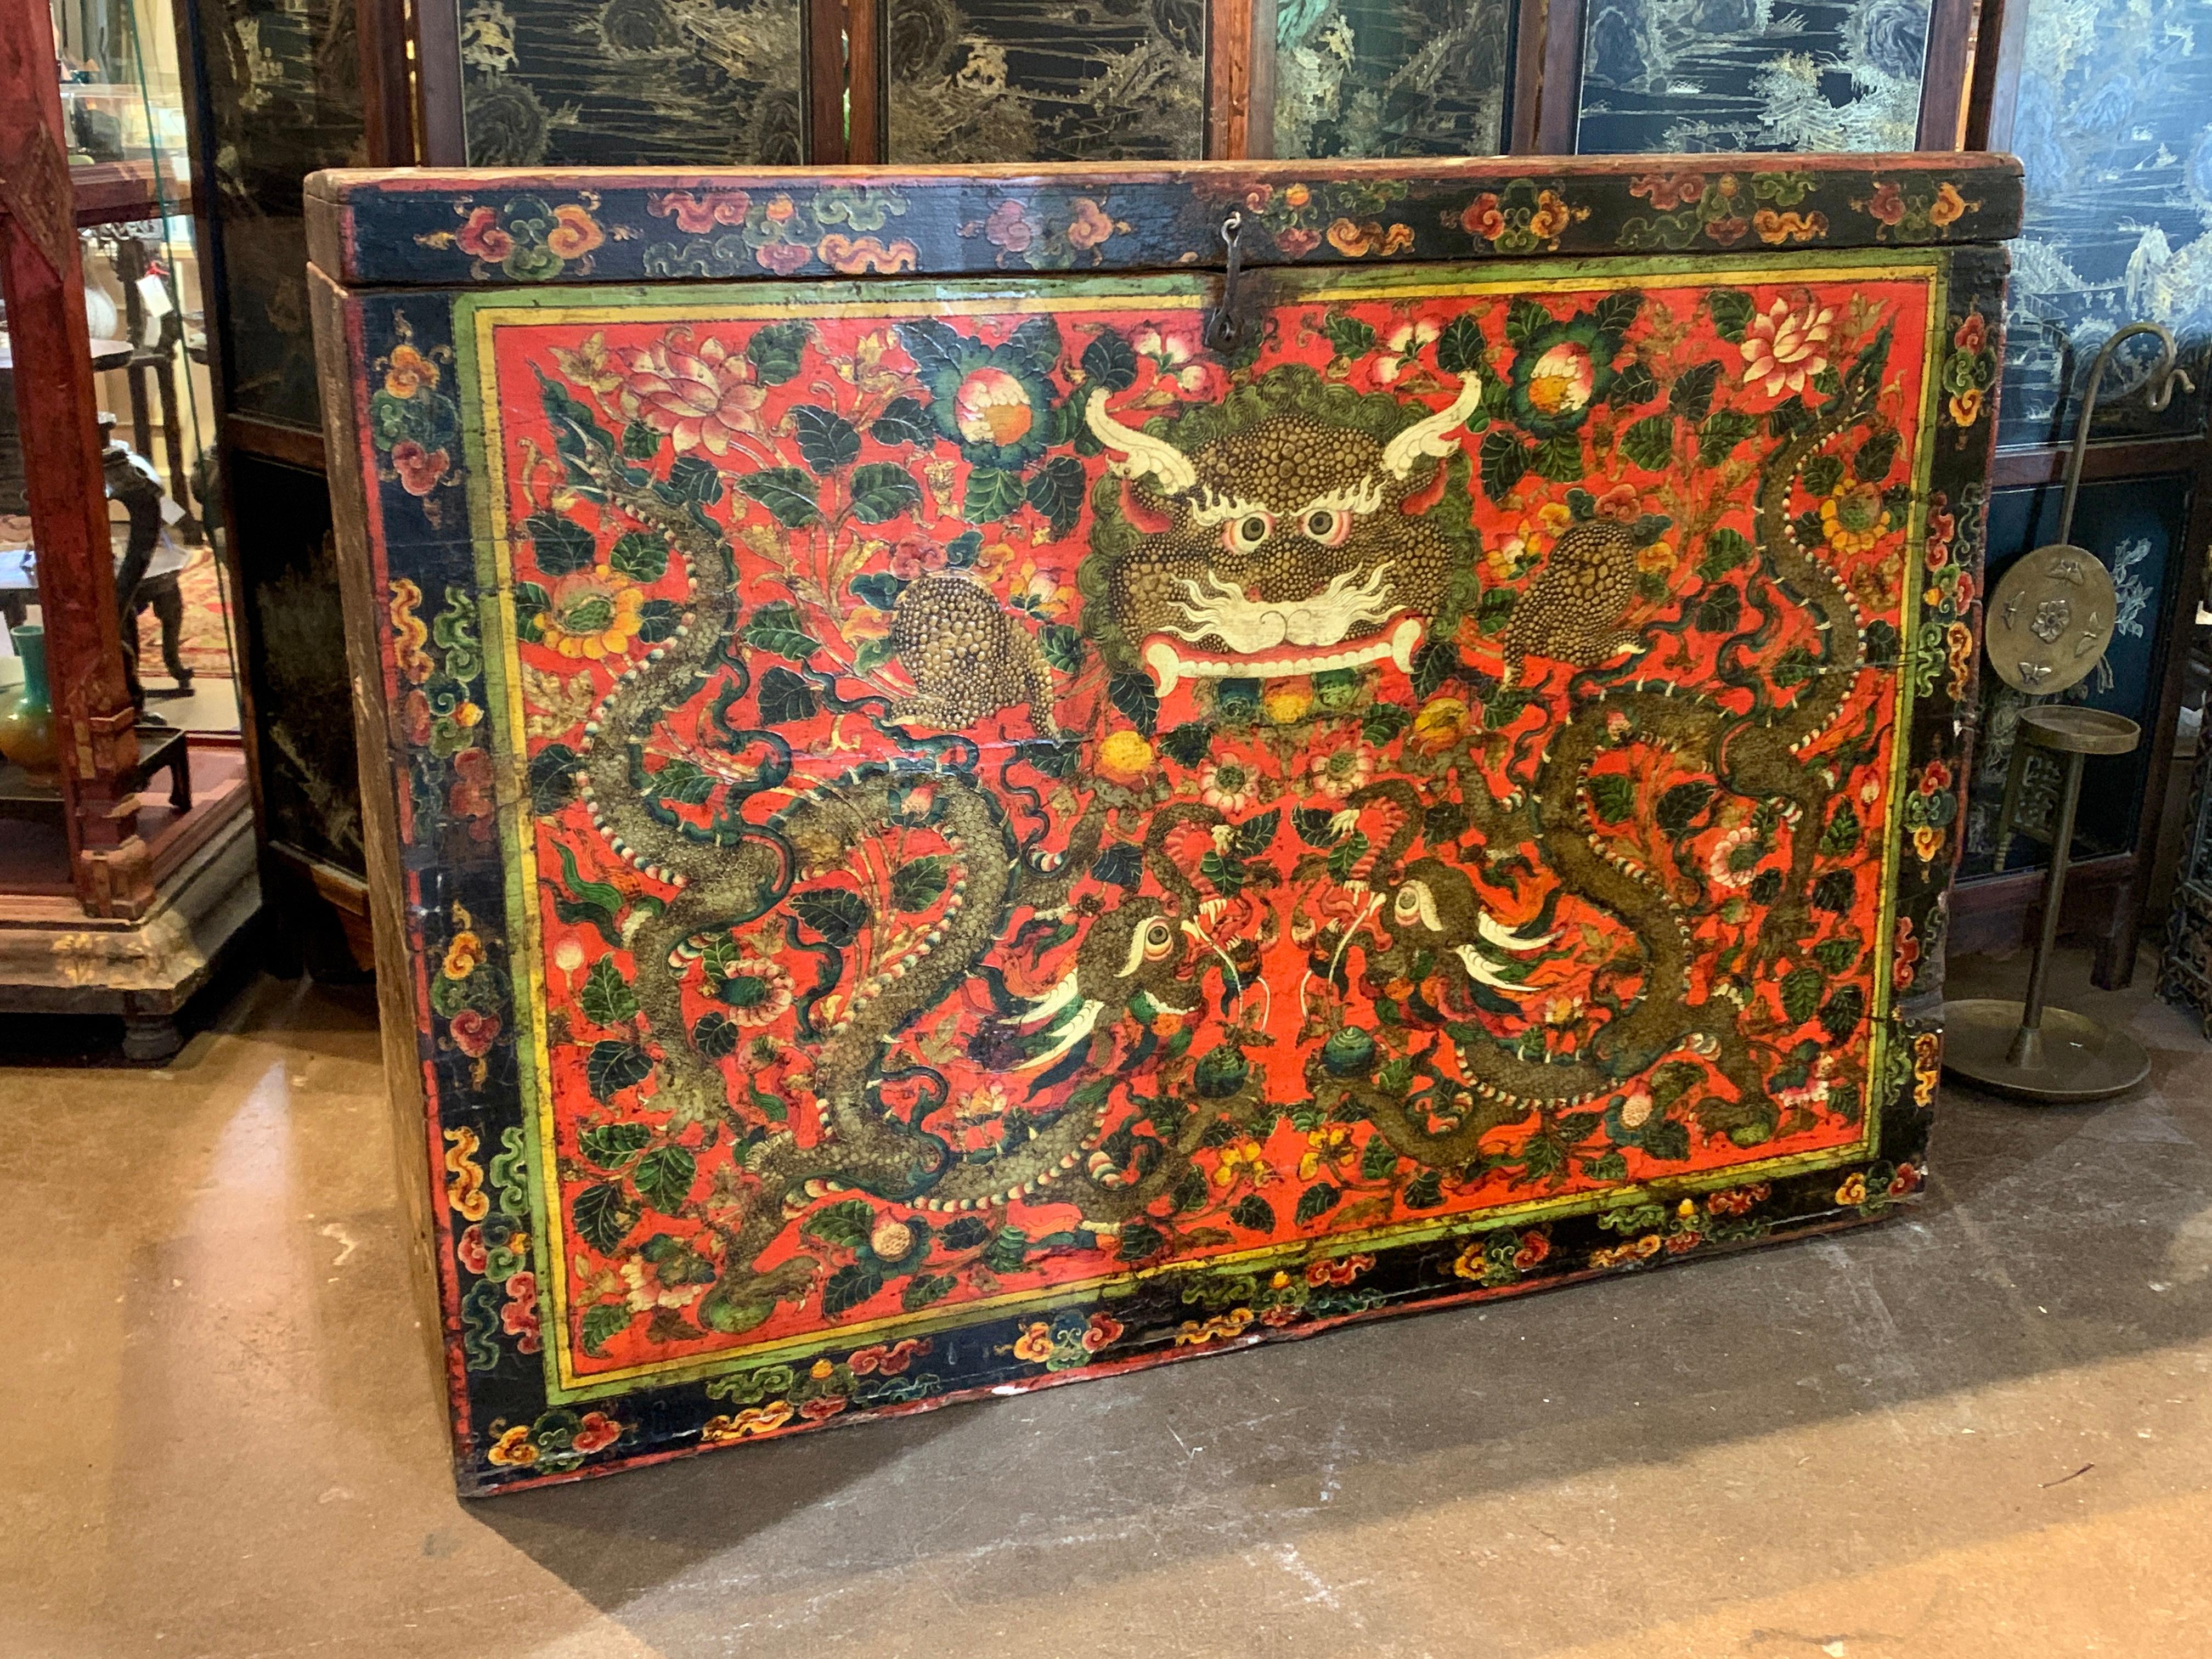 A powerful and impressive large and tall Tibetan orange red lacquer painted storage trunk featuring a Kirtimukha, Face of Glory, late 19th or early 20th century, Tibet.

The large storage chest or trunk crafted of hand hewn wood and hand forged